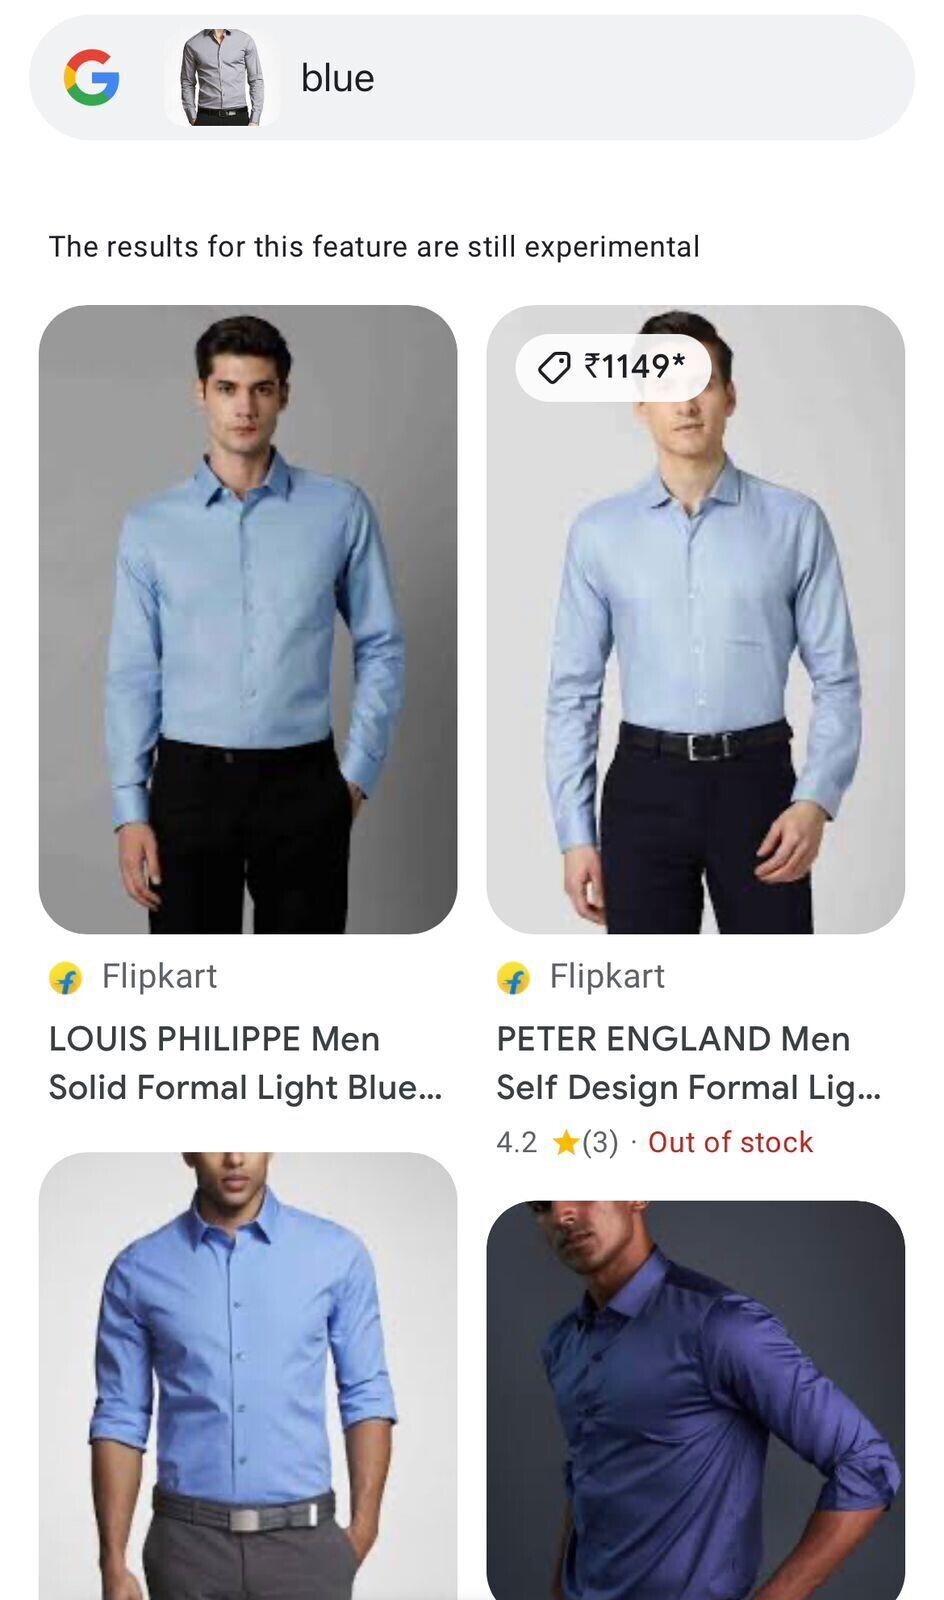 An example of a screenshot of a gray shirt and “blue” text in Google visual search